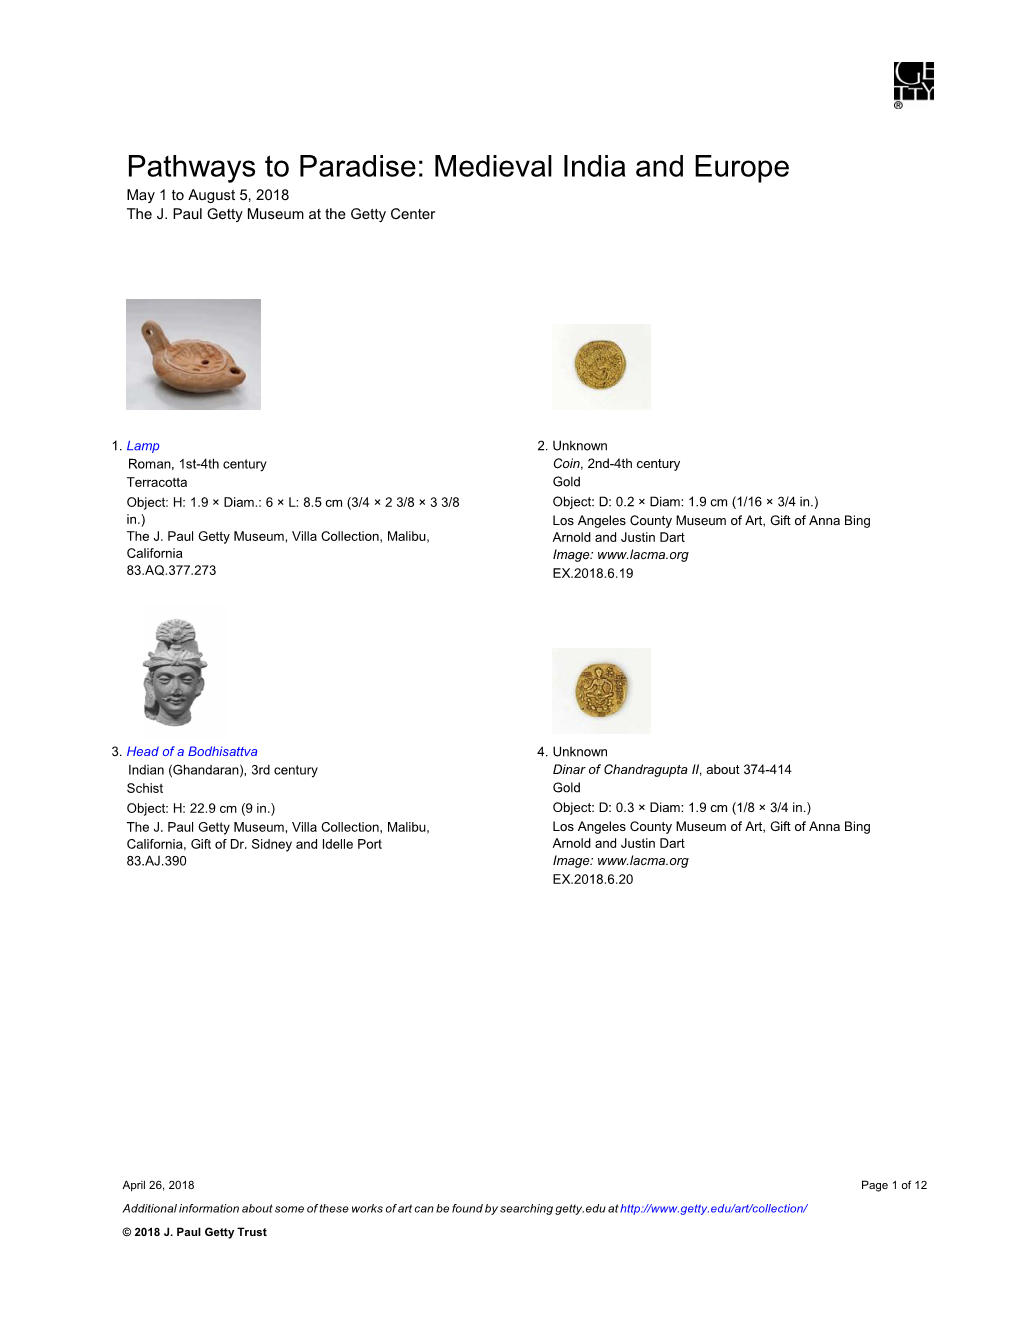 Pathways to Paradise: Medieval India and Europe May 1 to August 5, 2018 the J